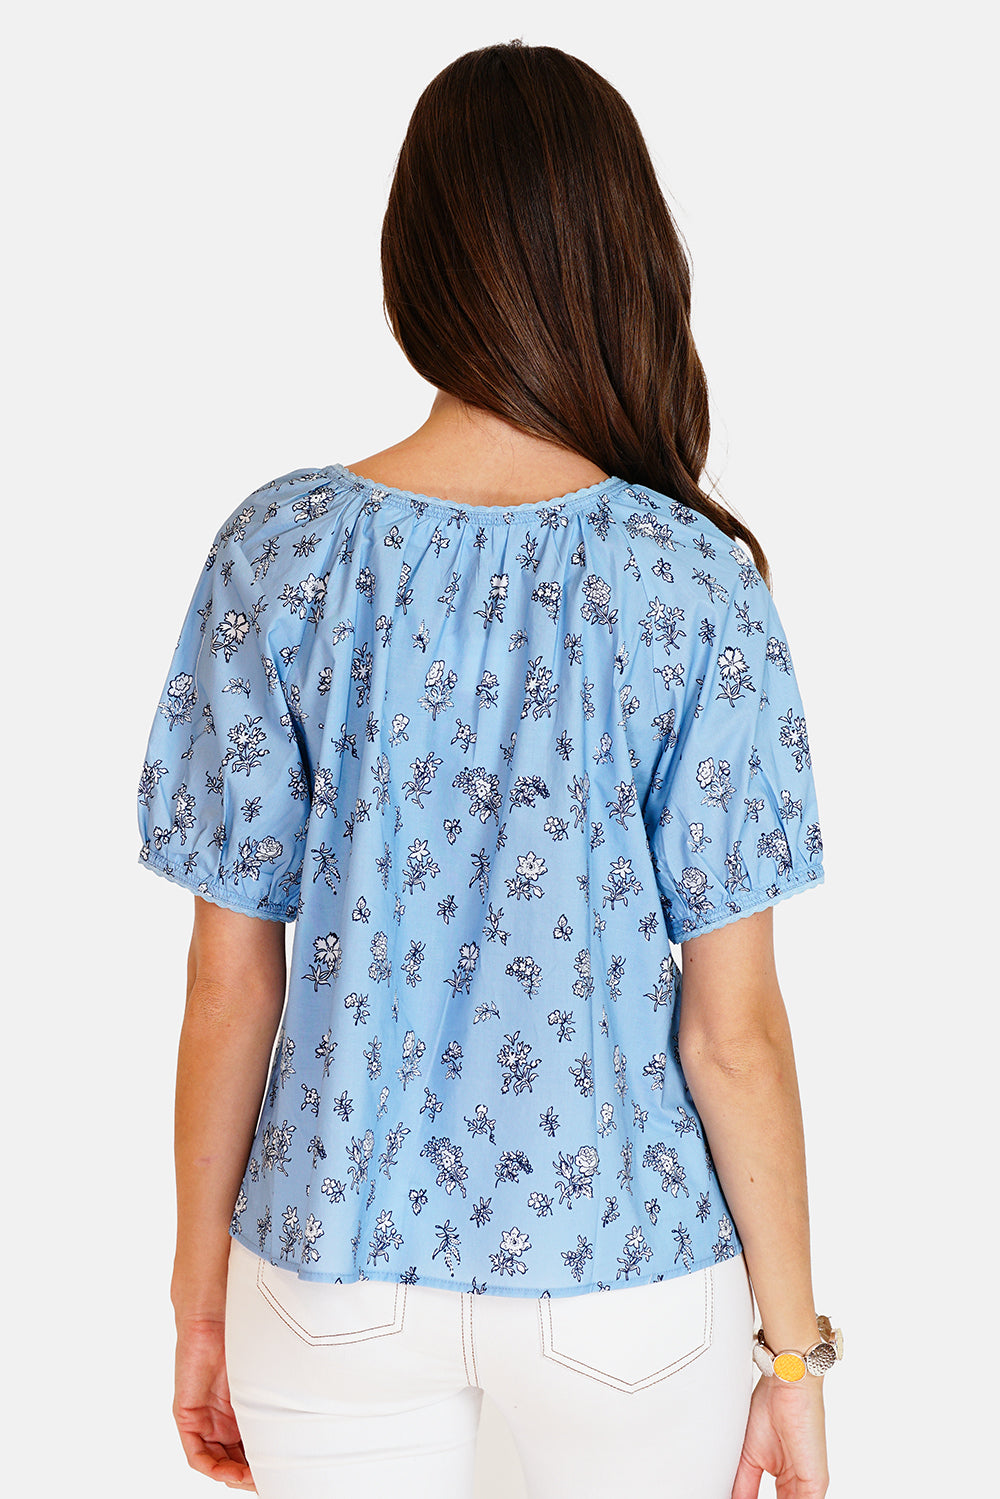 Blouse with embroidery at the edge of the collar, 3/4 sleeves in print